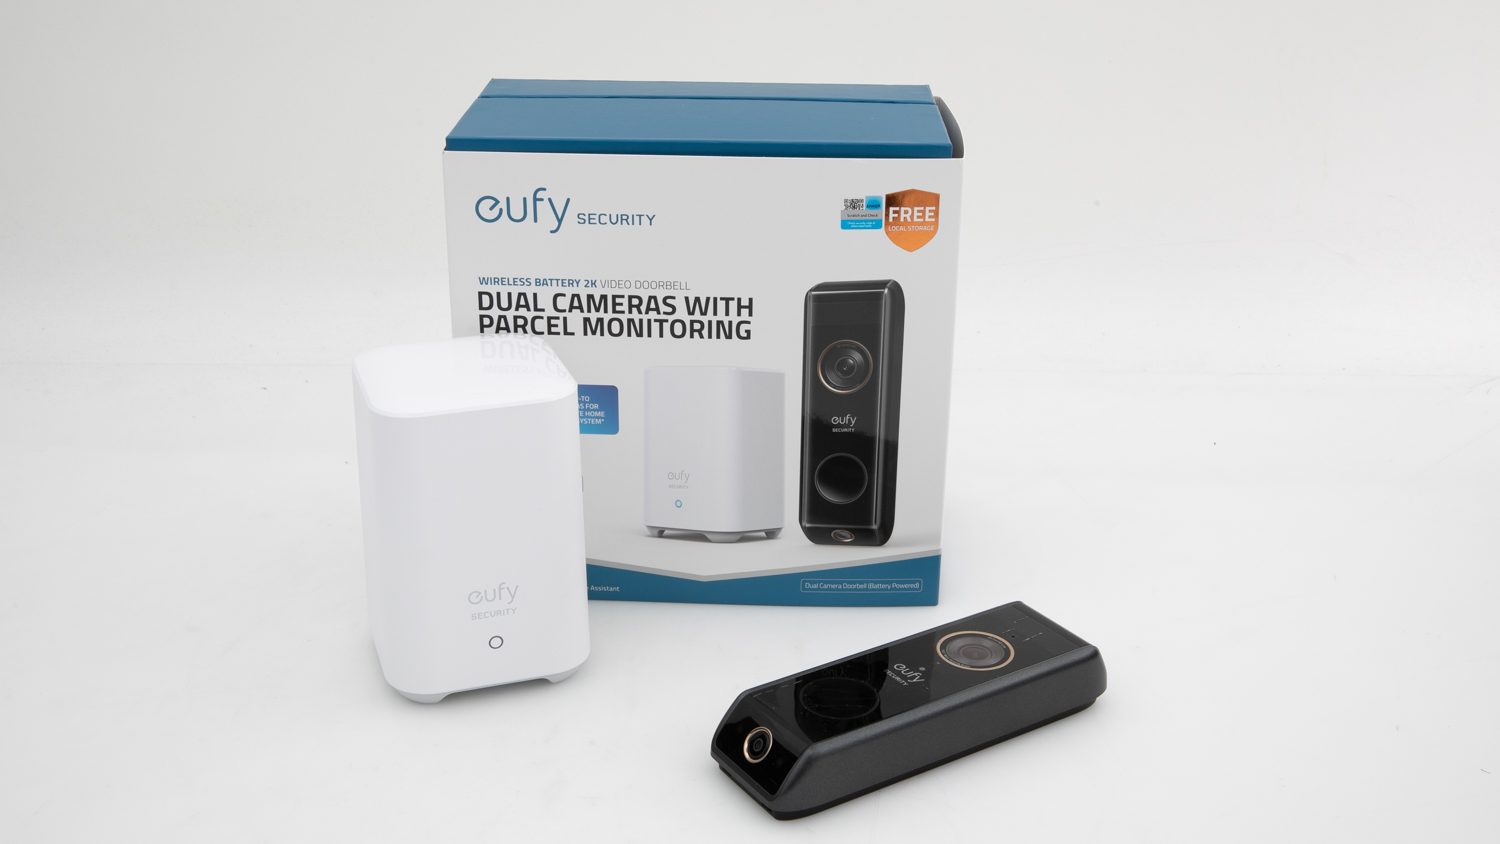 Eufy Wireless Battery 2K Video Doorbell Dual Cameras with Parcel Monitoring carousel image